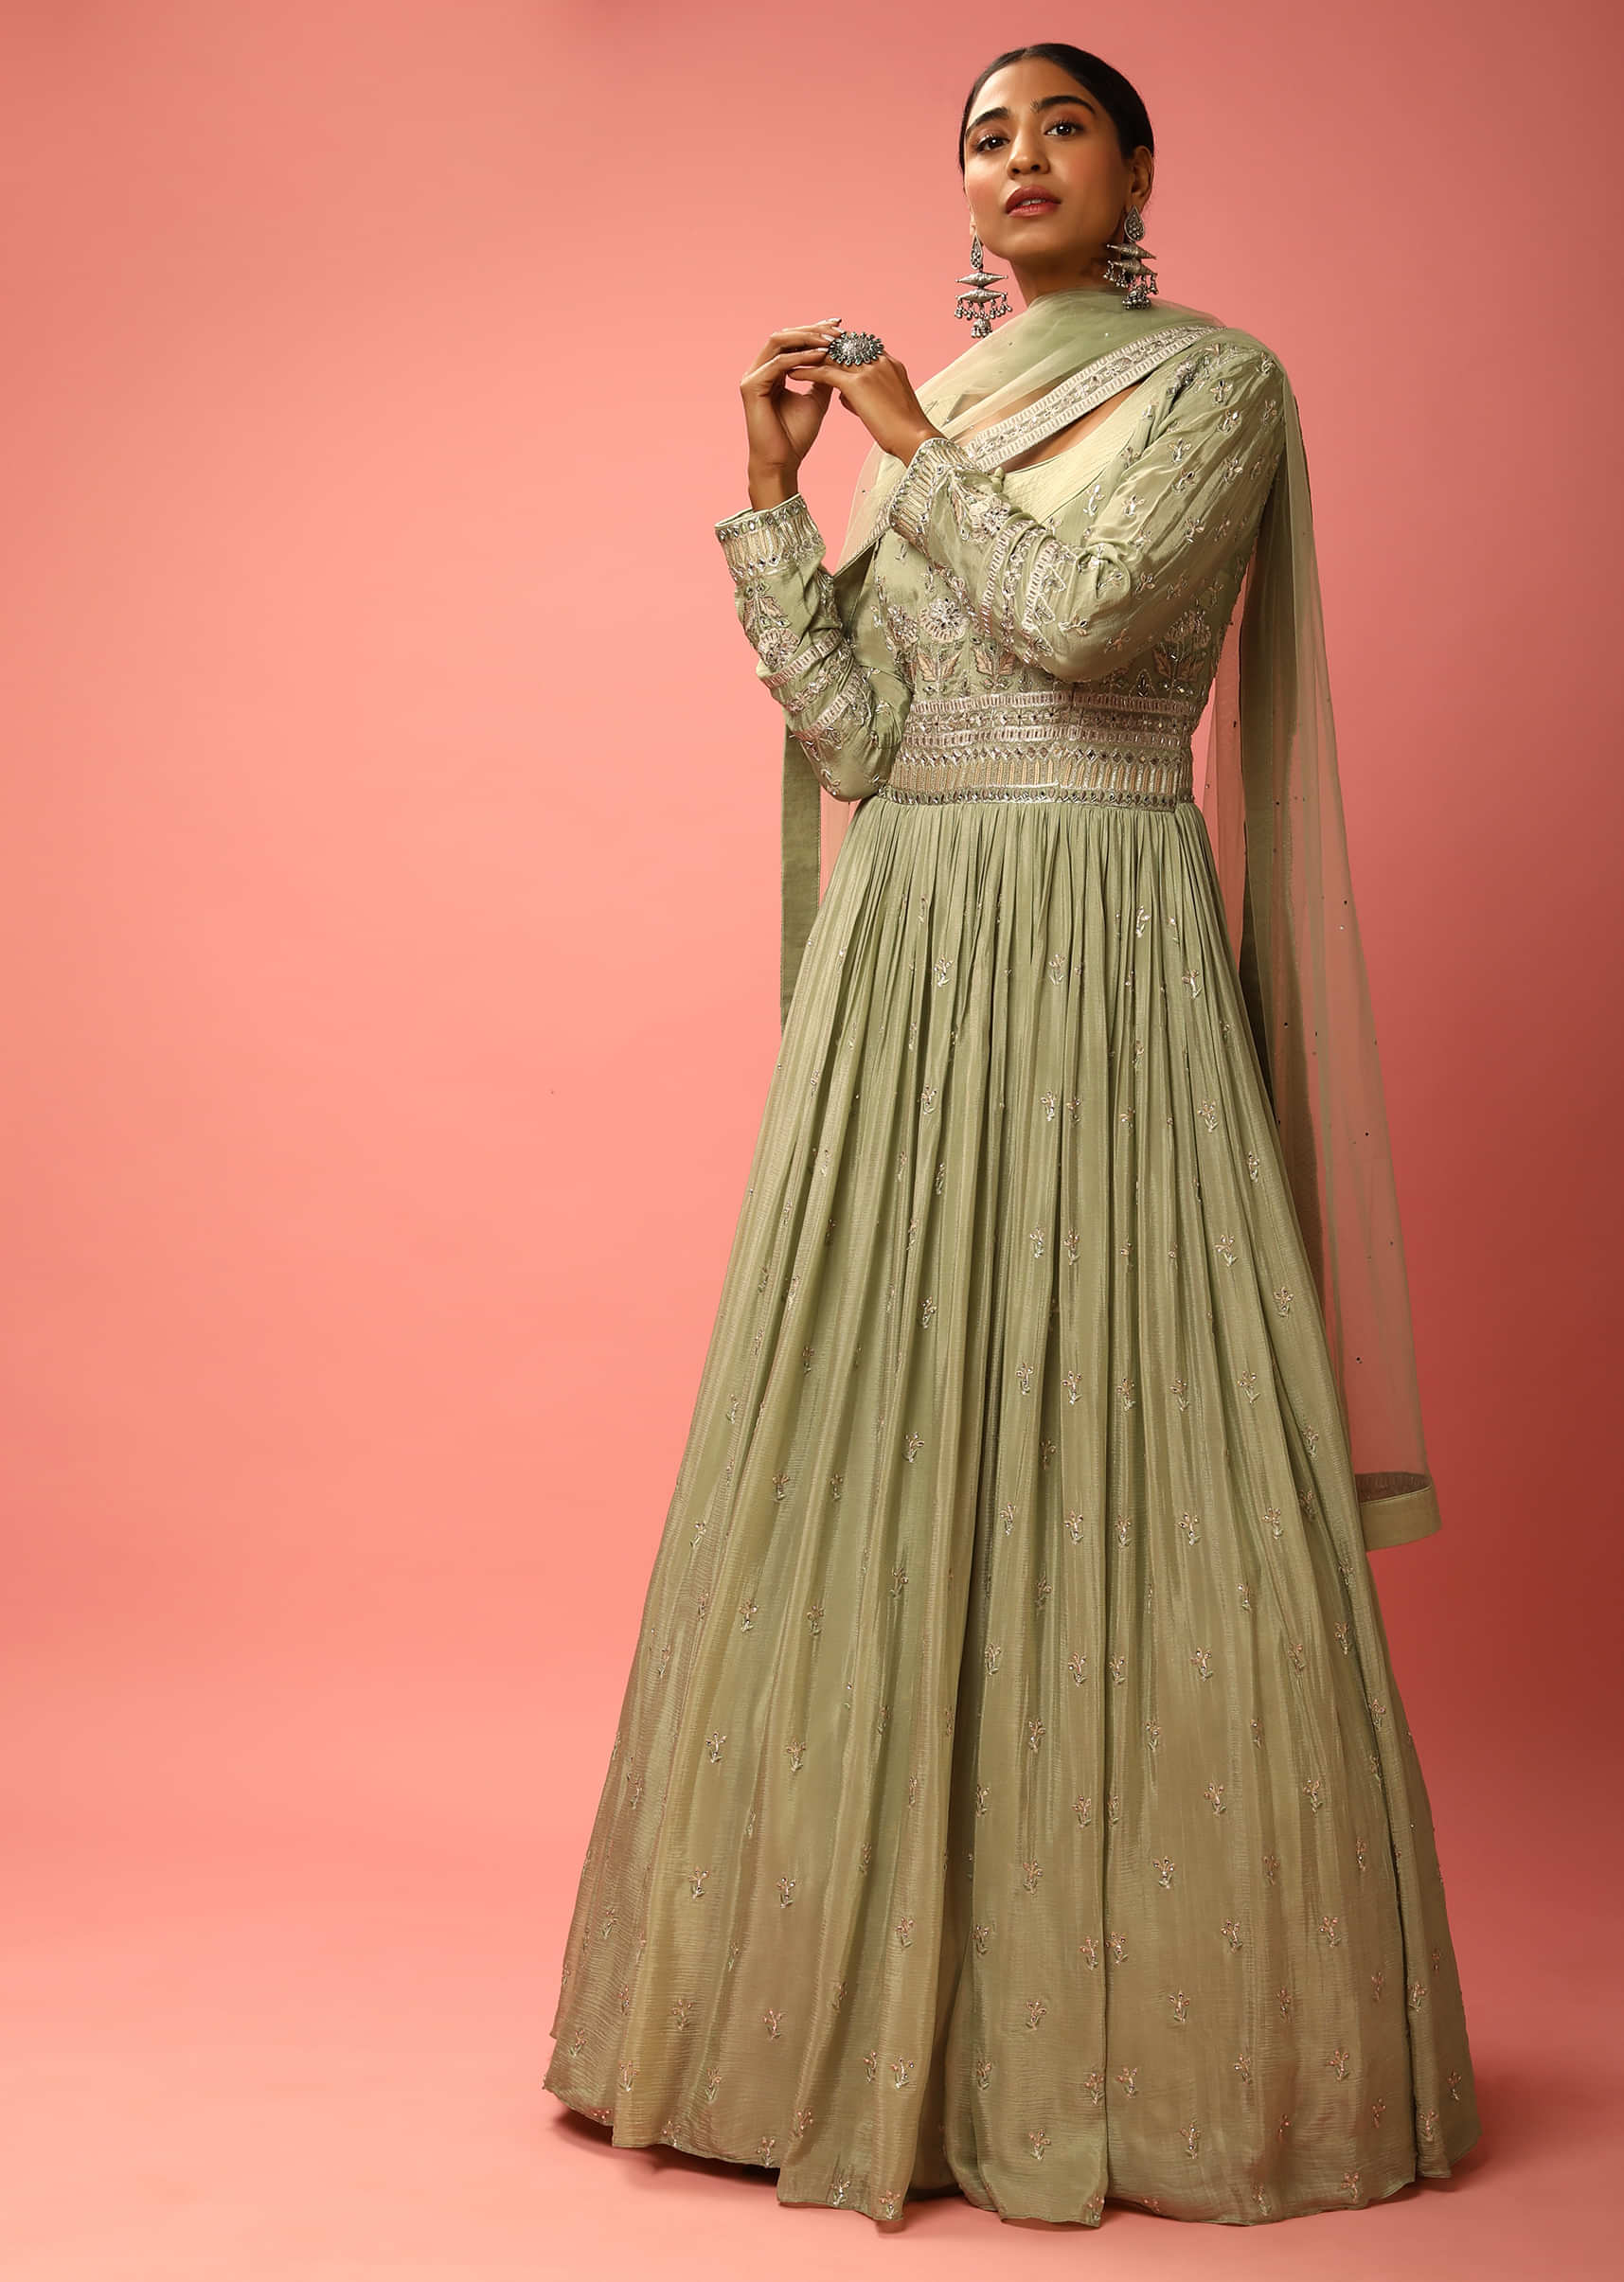 Laurel Green Anarkali Suit In Chiffon With Mirror And Resham Embroidered Floral Motifs